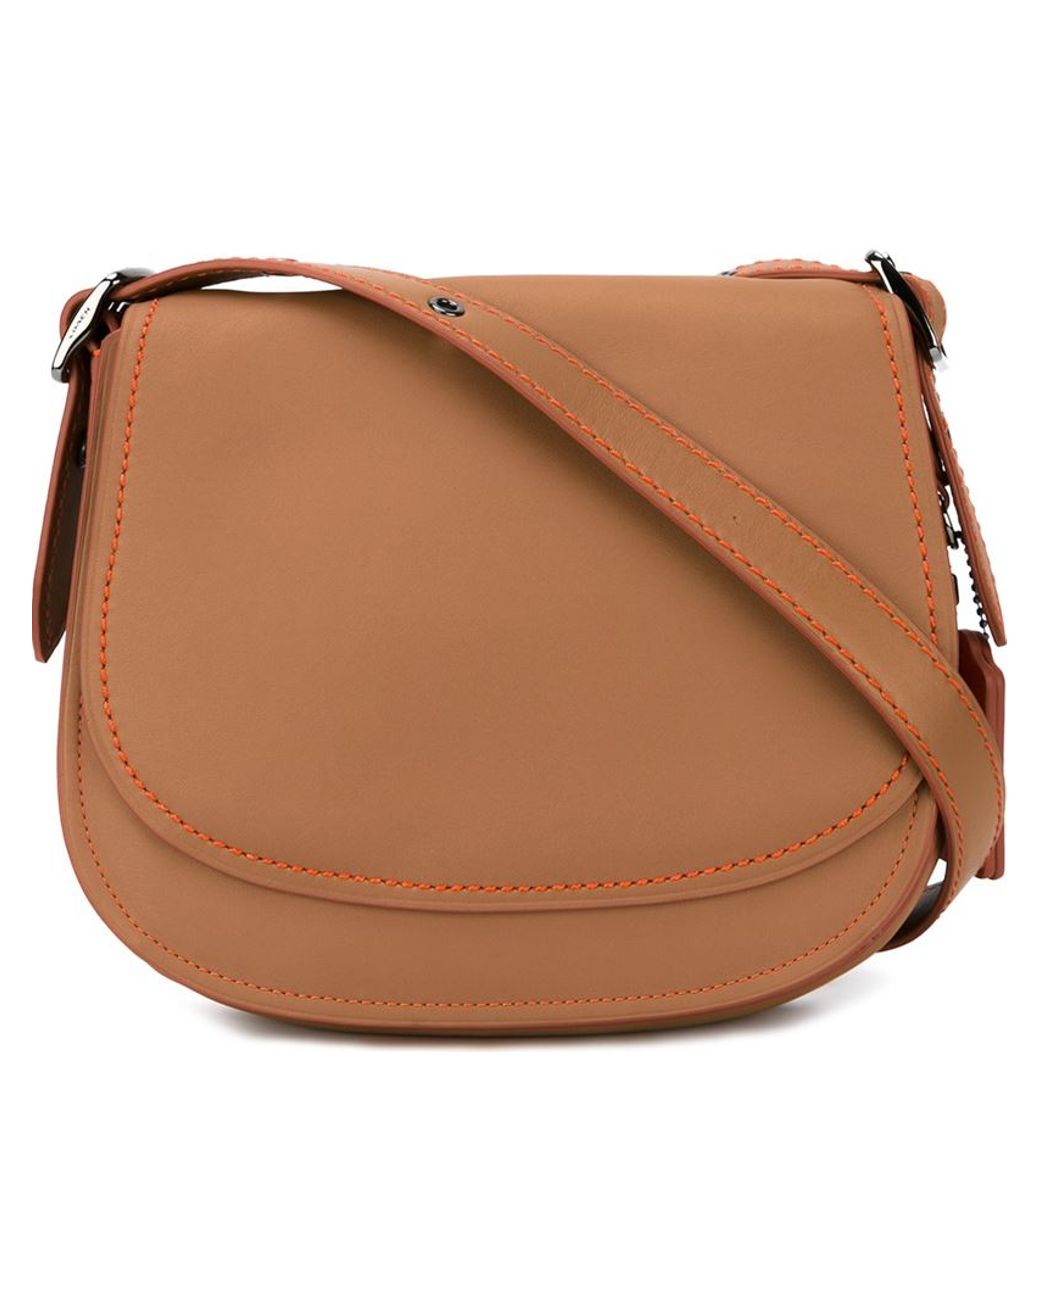 COACH Saddle Leather Cross-Body Bag in Brown | Lyst